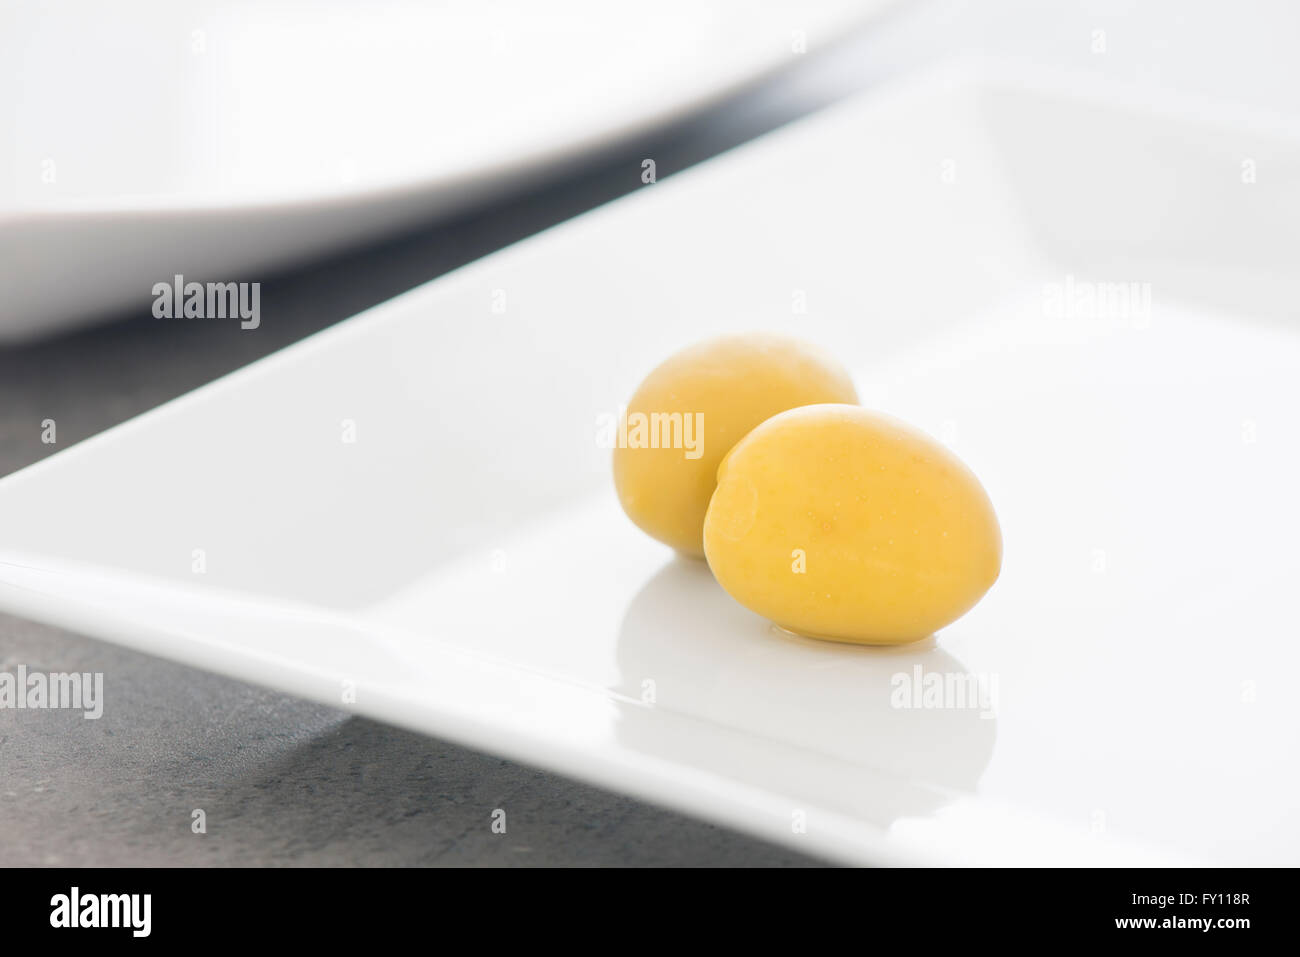 Green olives on white plate in close up. Still life photo of appetizer or snack. Stock Photo